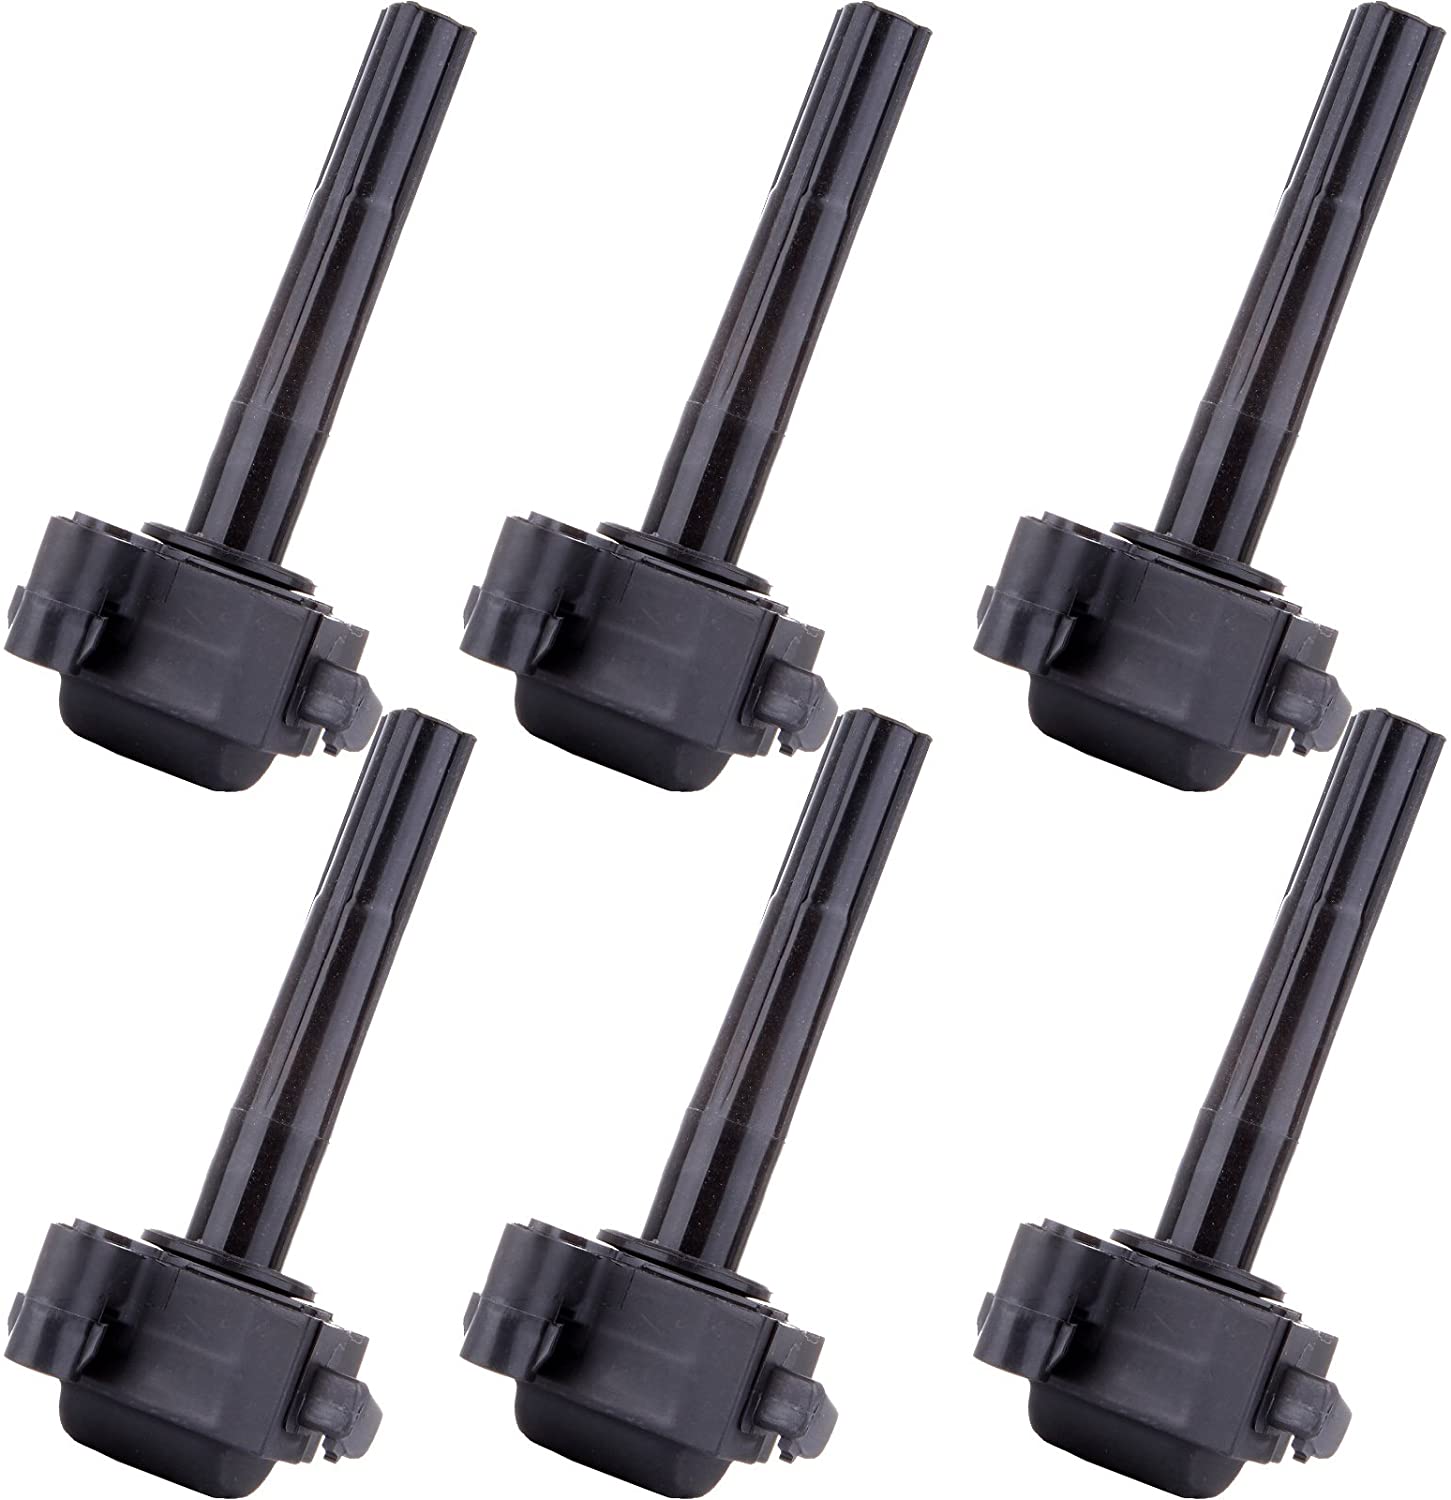 SCITOO 100% New 6pcs Ignition Coil Set Compatible with Lexu-s ES300 Toyot-a Avalon/Camry/Sienna/Solara 1996-2003 Automobiles Fit for OE: UF155 C1040